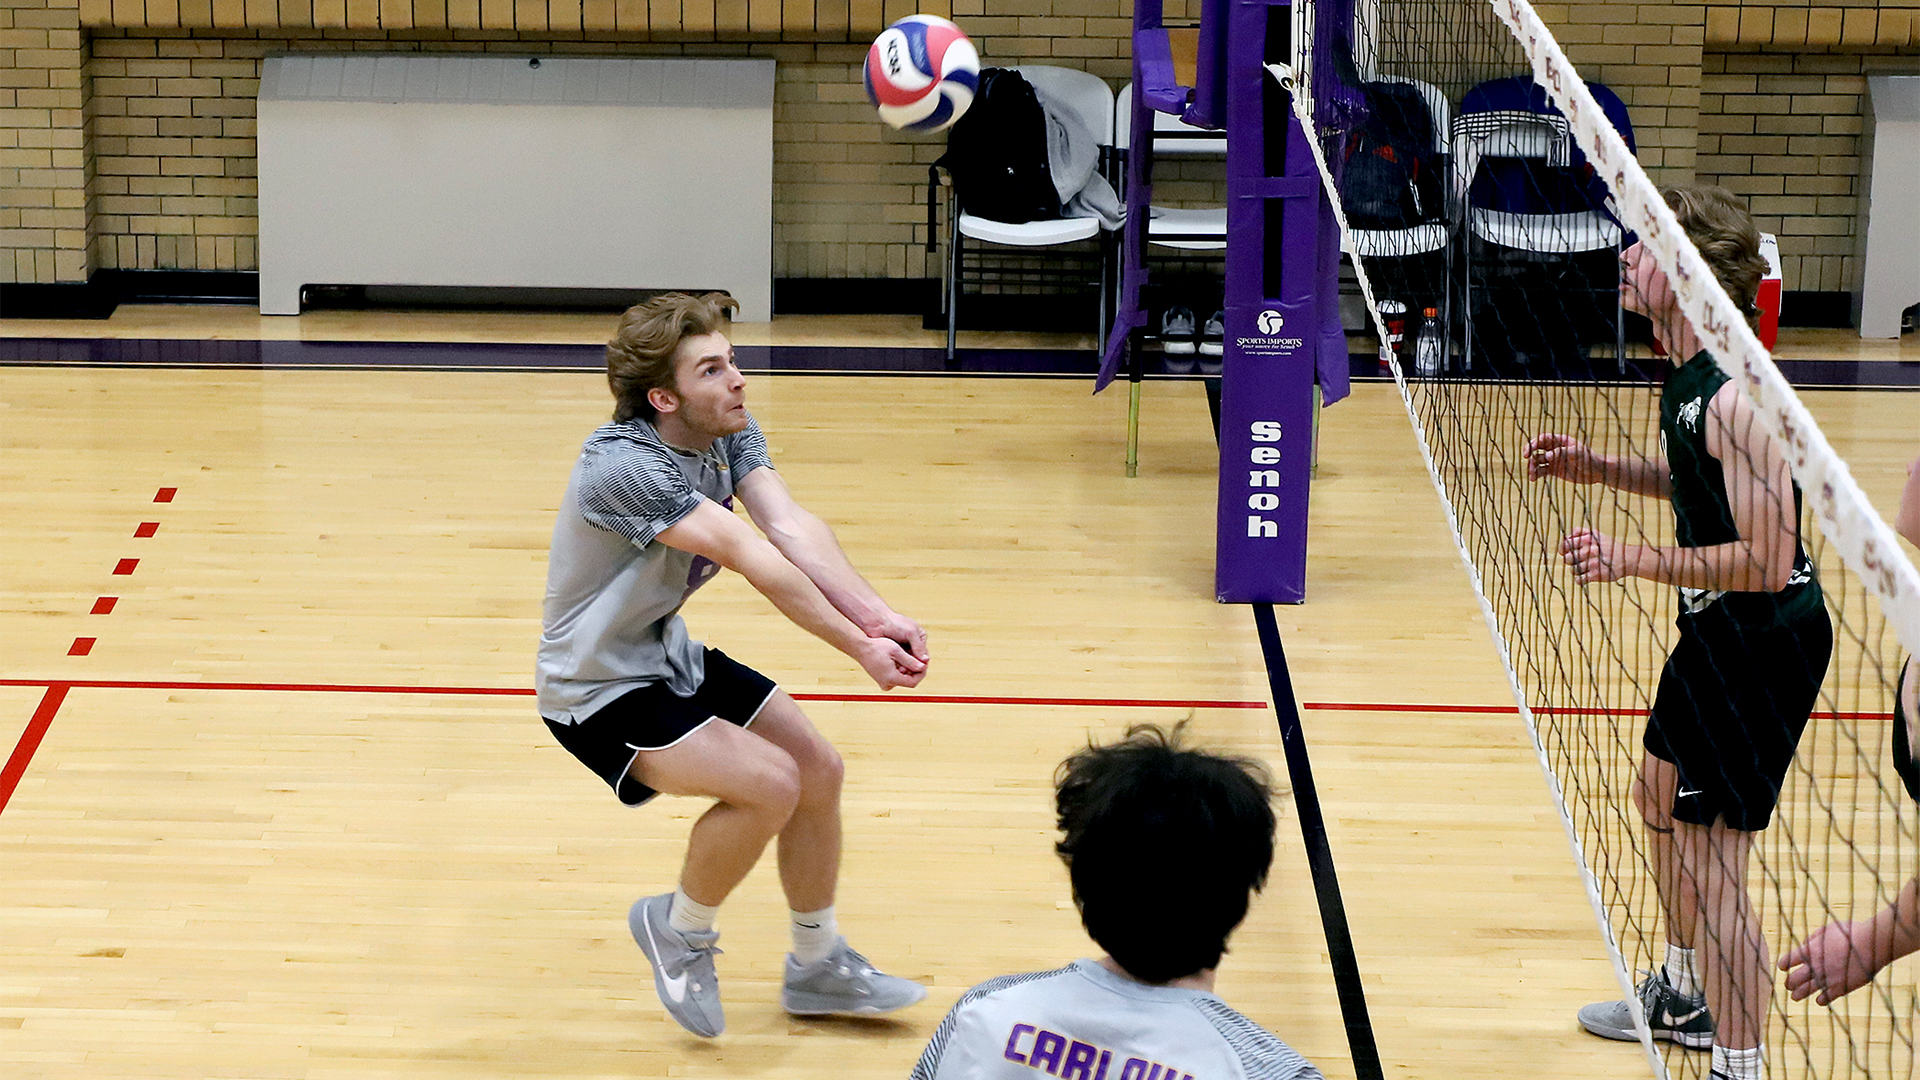 Russ Cyprowski led the Celtics with eight kills and nine digs. Photo by Robert Cifone.